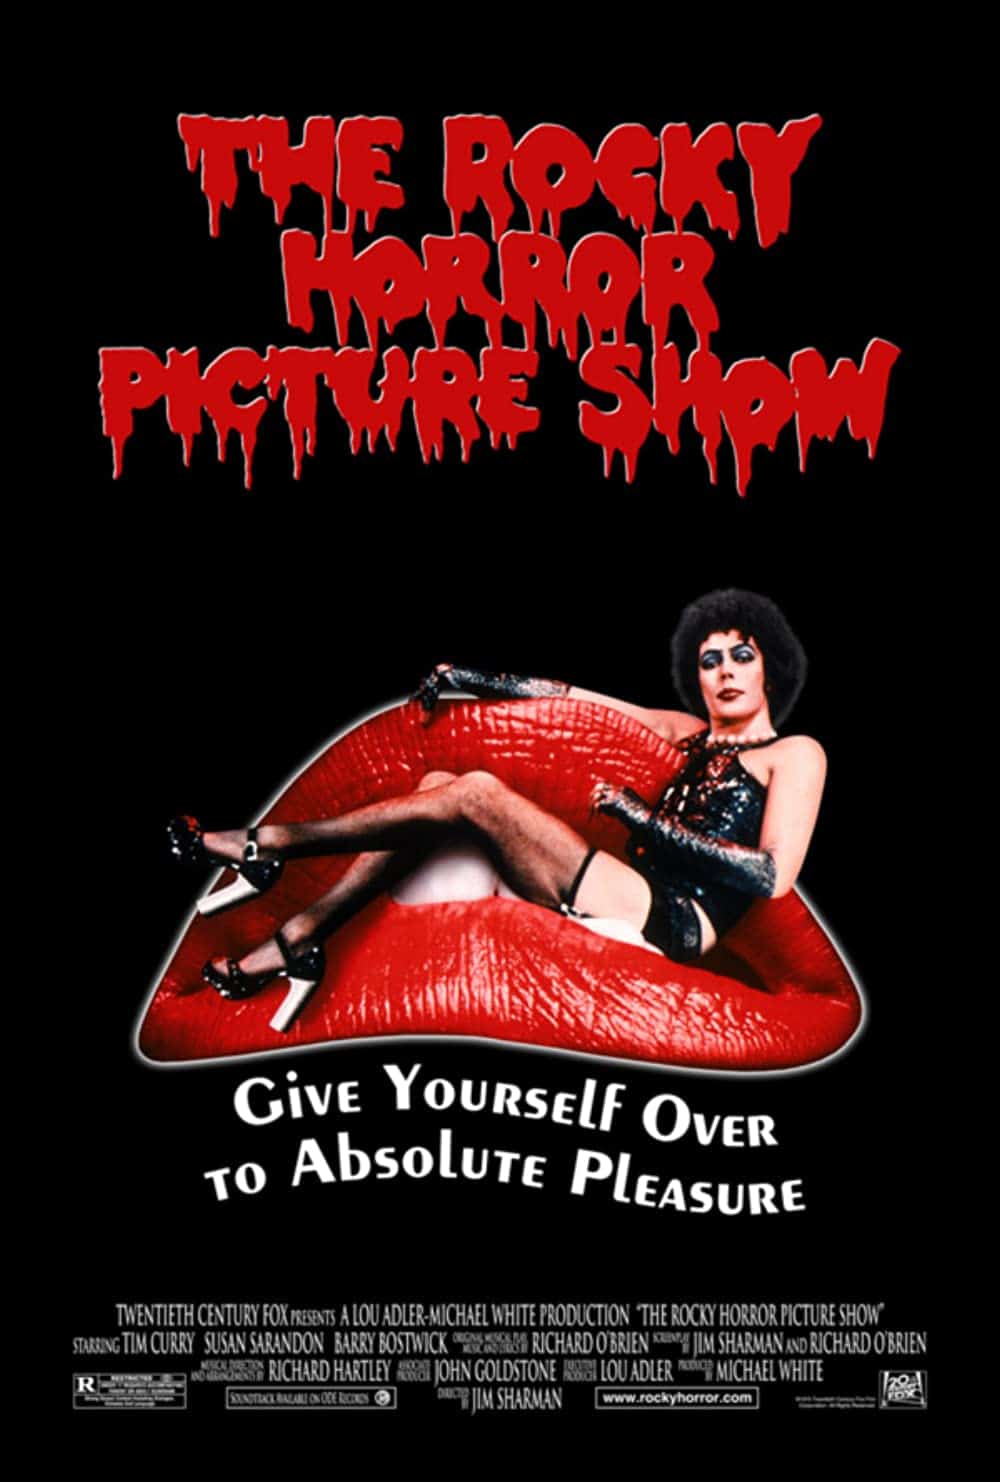 The Rocky Horror Picture Show Best Movies to Watch Drunk